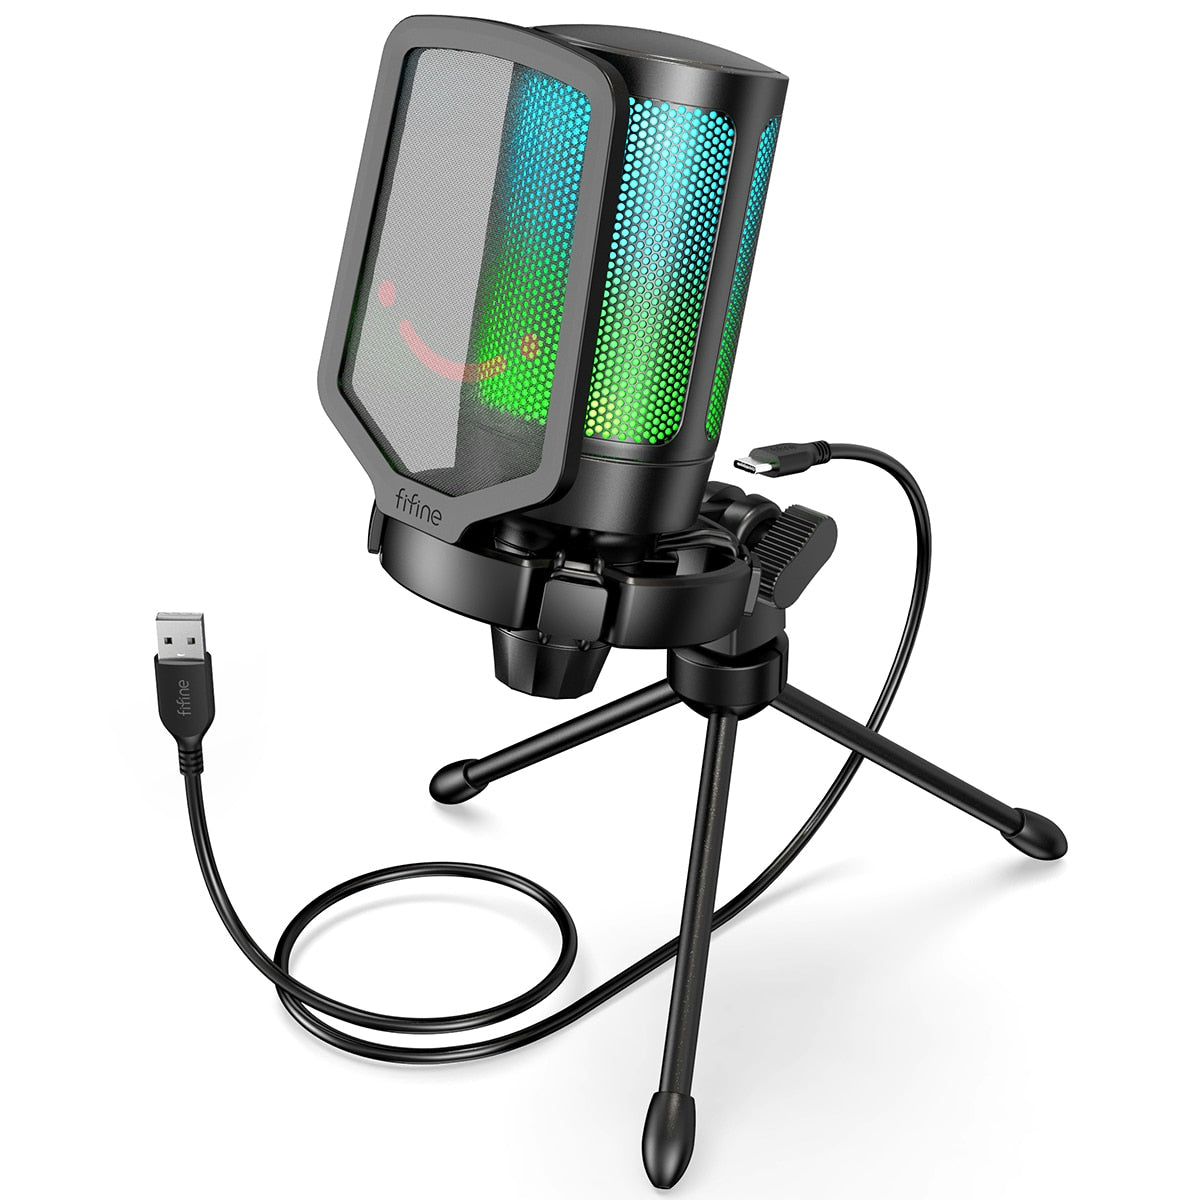 "FIFINE" Ampligame USB Microphone - League of Legends Fan Store